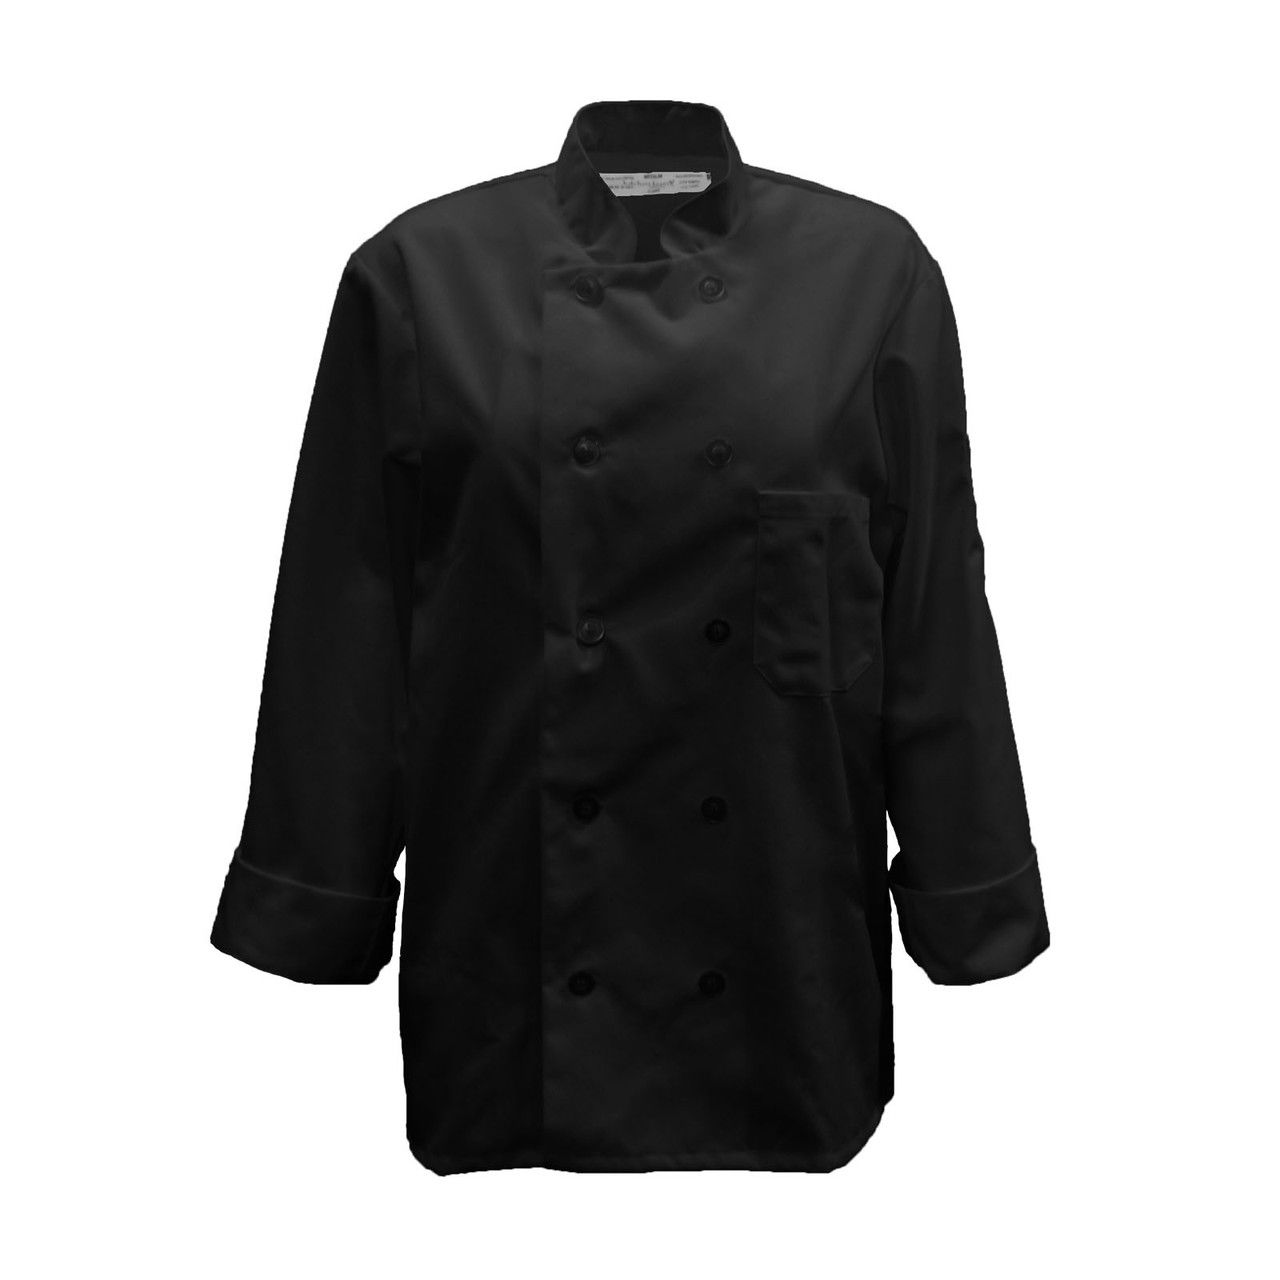 How many buttons does this chef coat have?